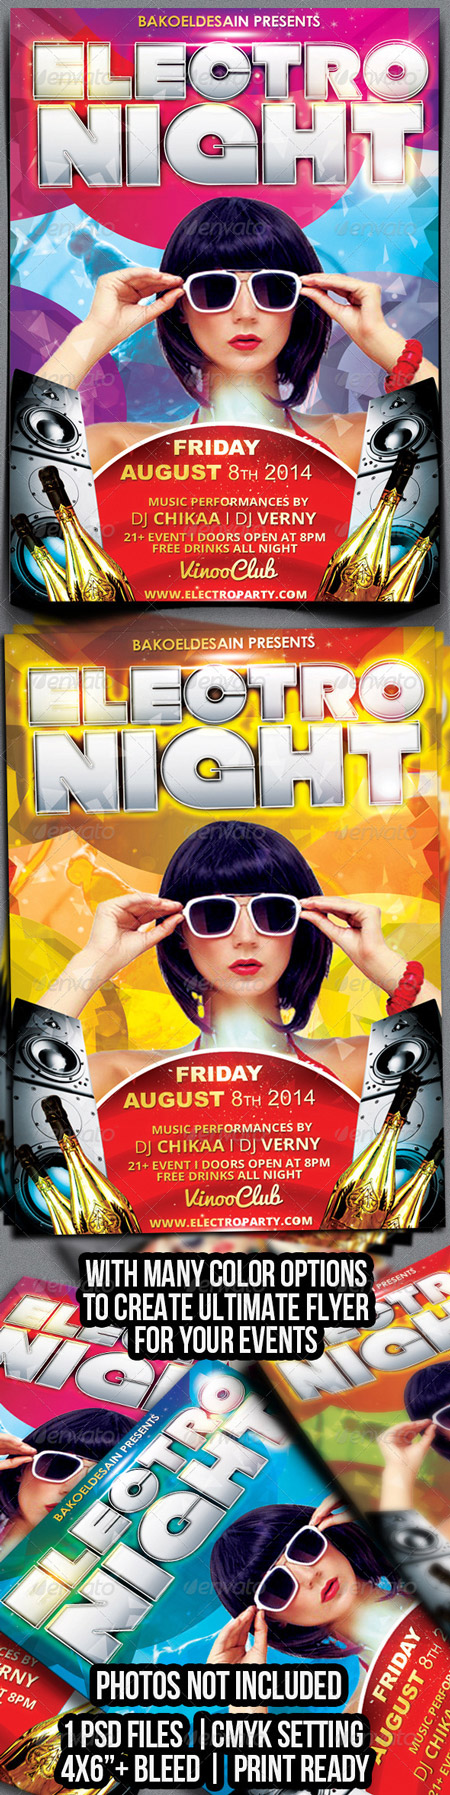 PSD - Electro Night Party Flyer 5342851